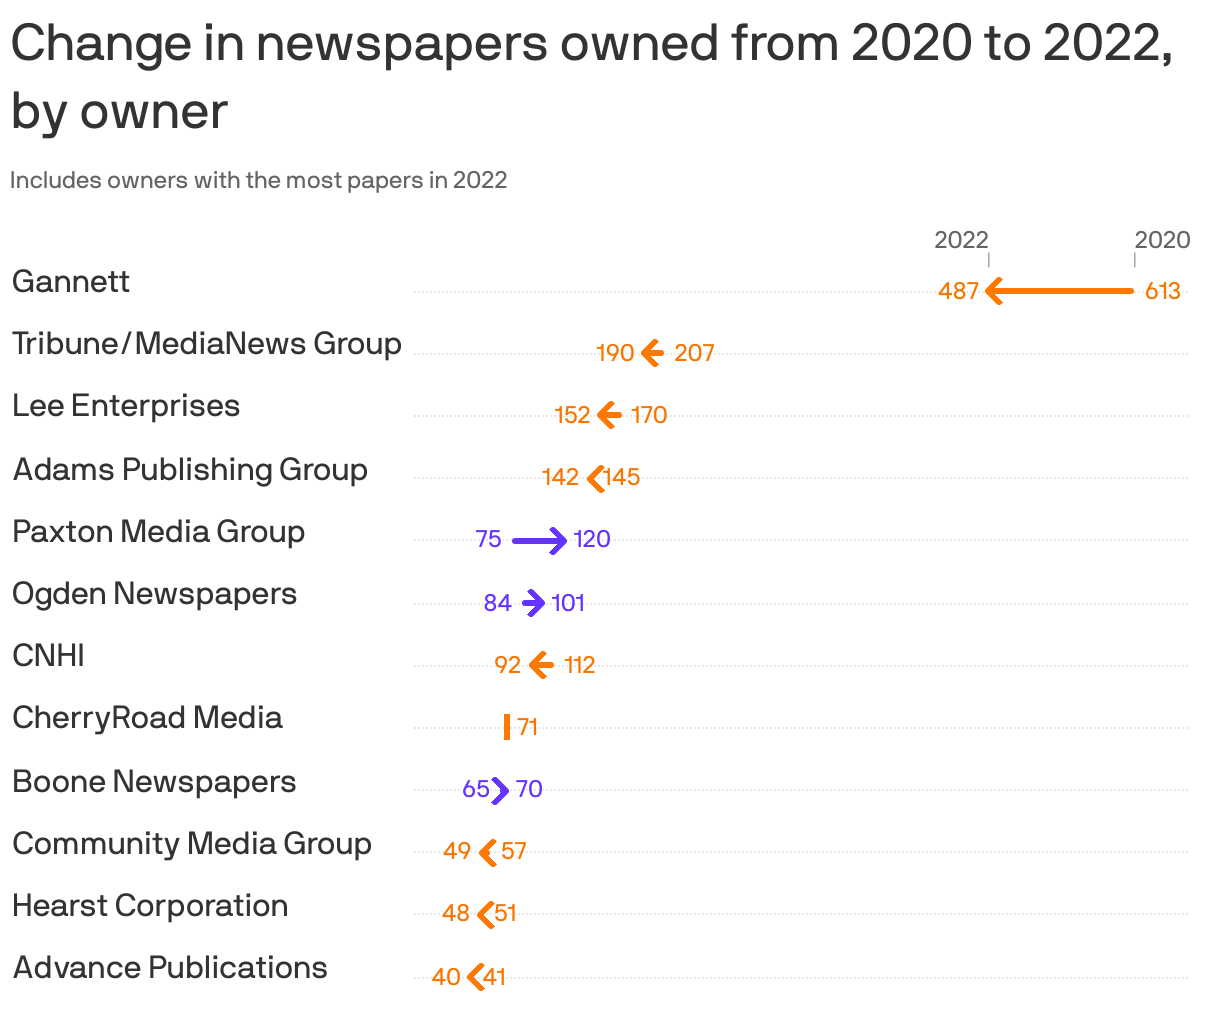 Change in newspapers owned from 2020 to 2022, by owner